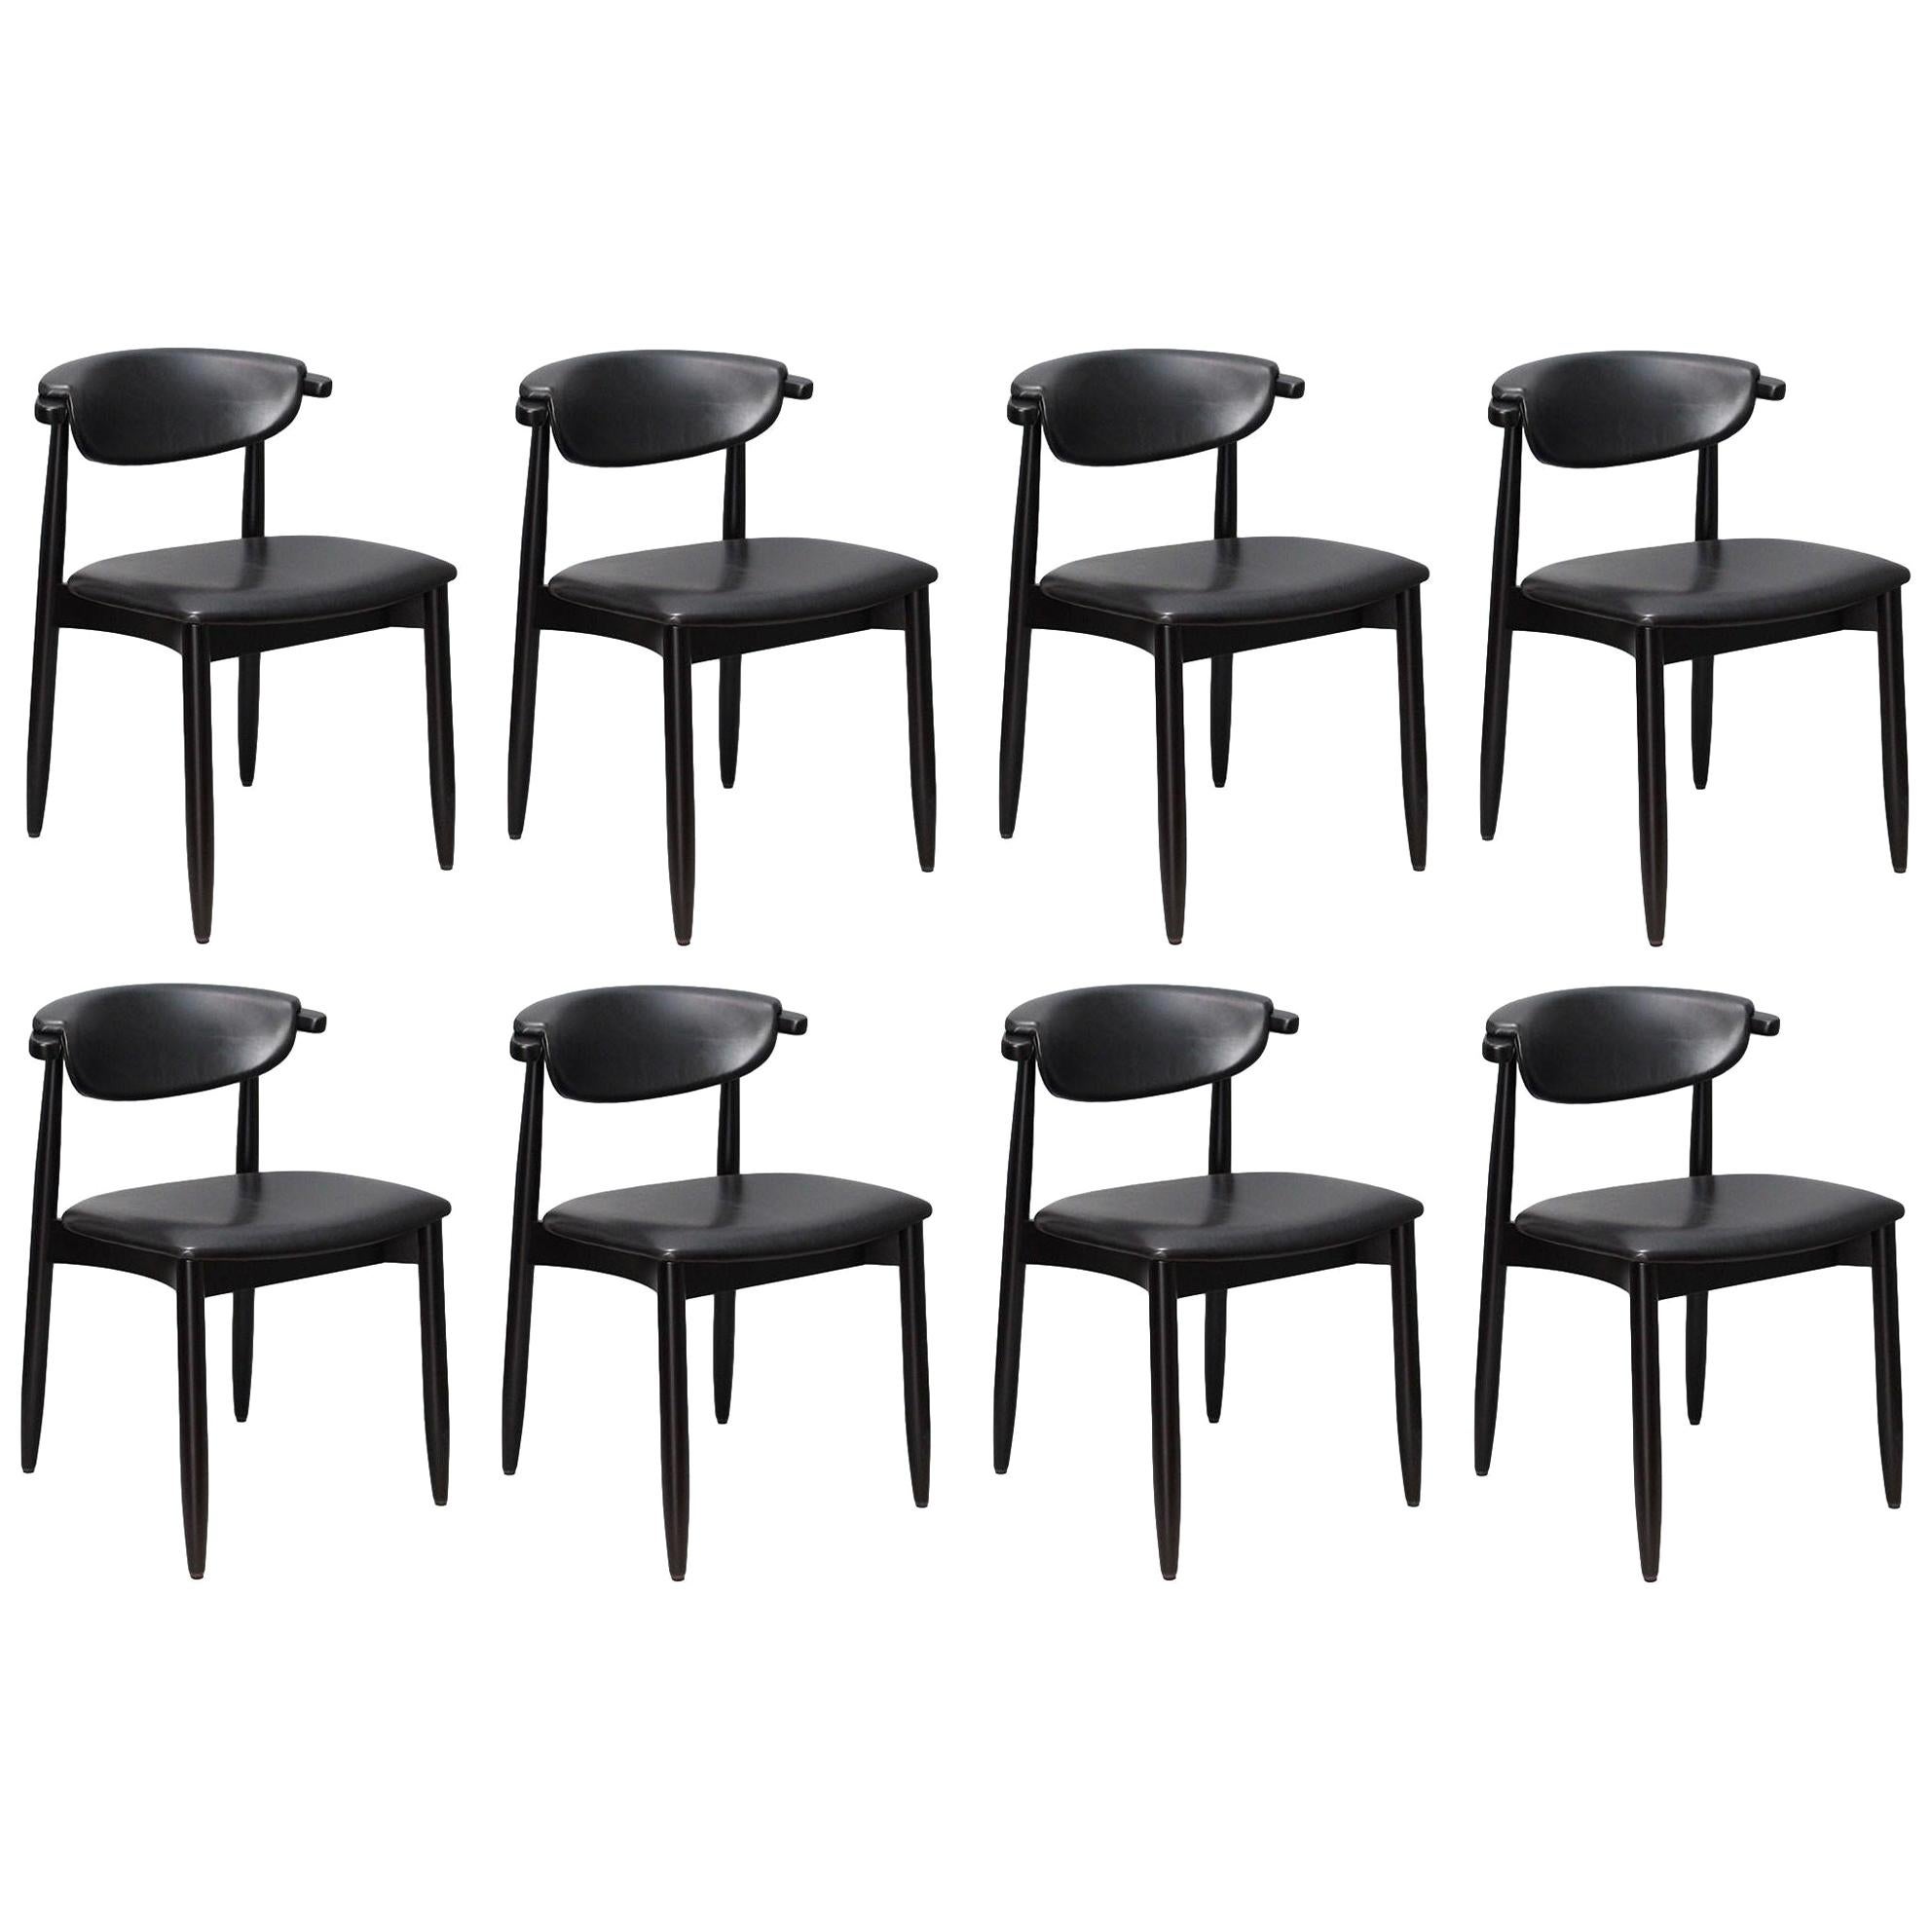 Mid-Century Modern Dining Chairs, Set of 8